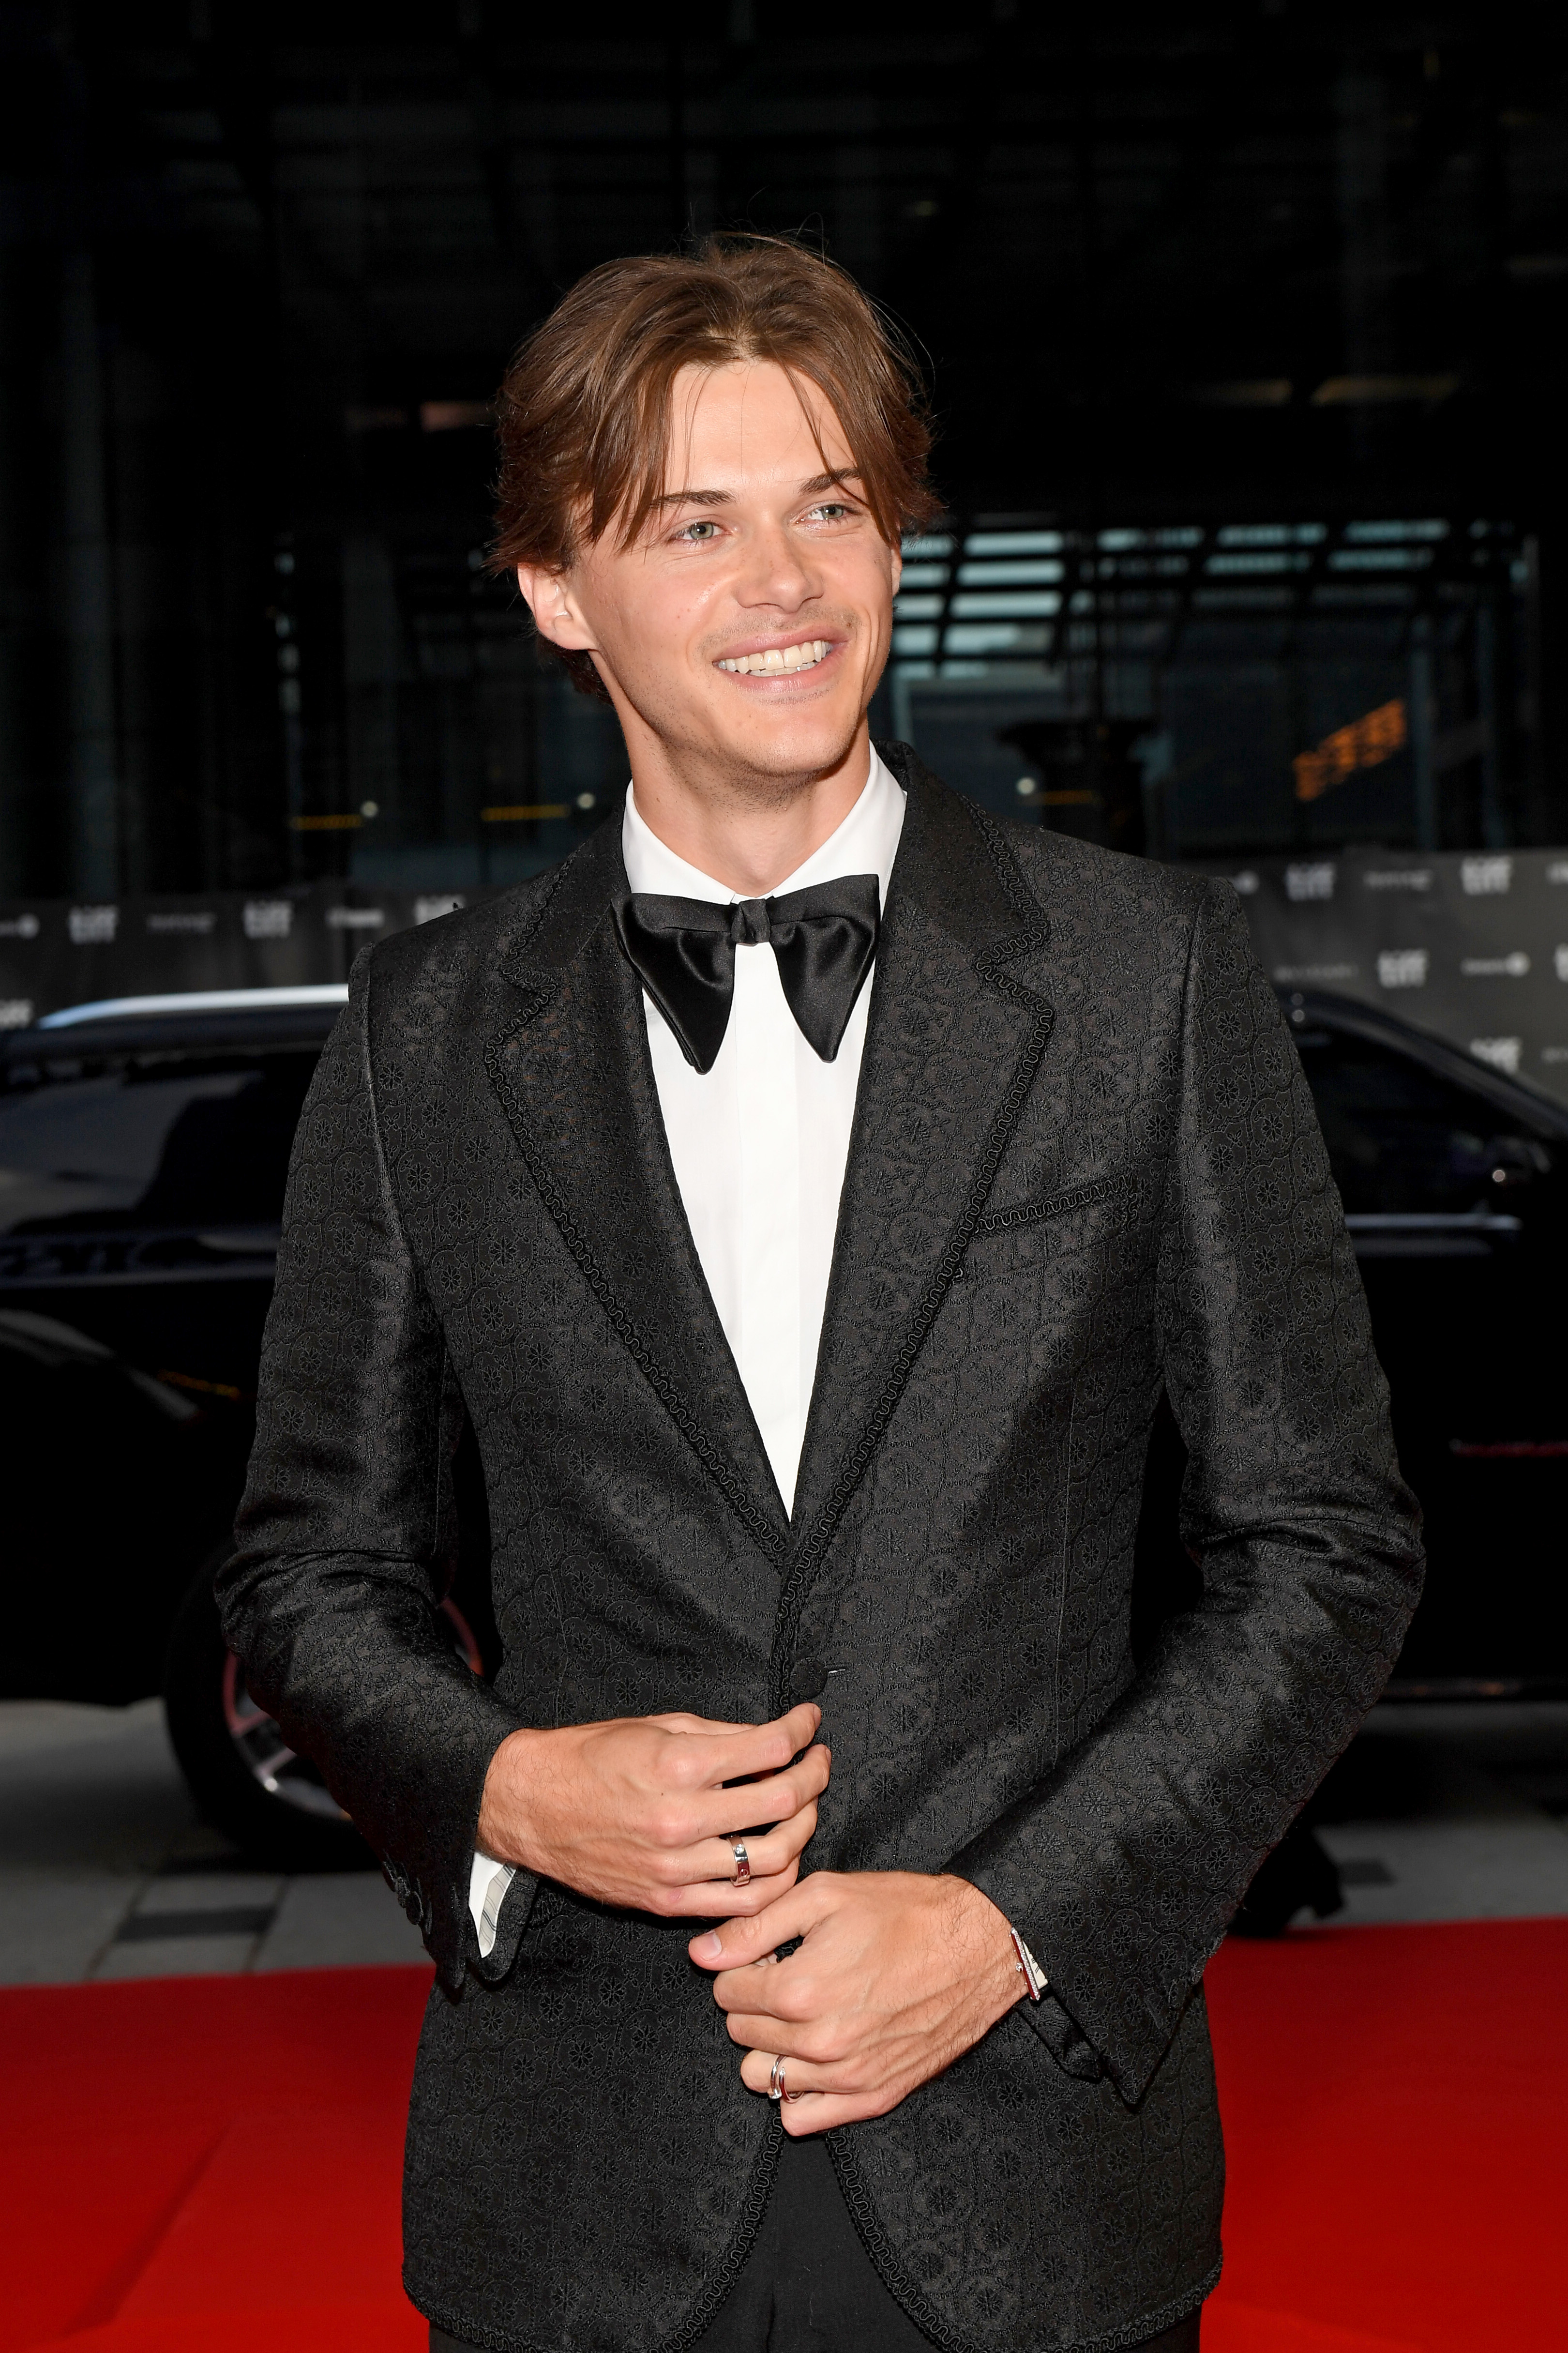 Christopher Briney is pictured at the Closing Night Gala Premiere of "Daliland" at Roy Thomson Hall on September 17, 2022, in Toronto, Ontario | Source: Getty Images